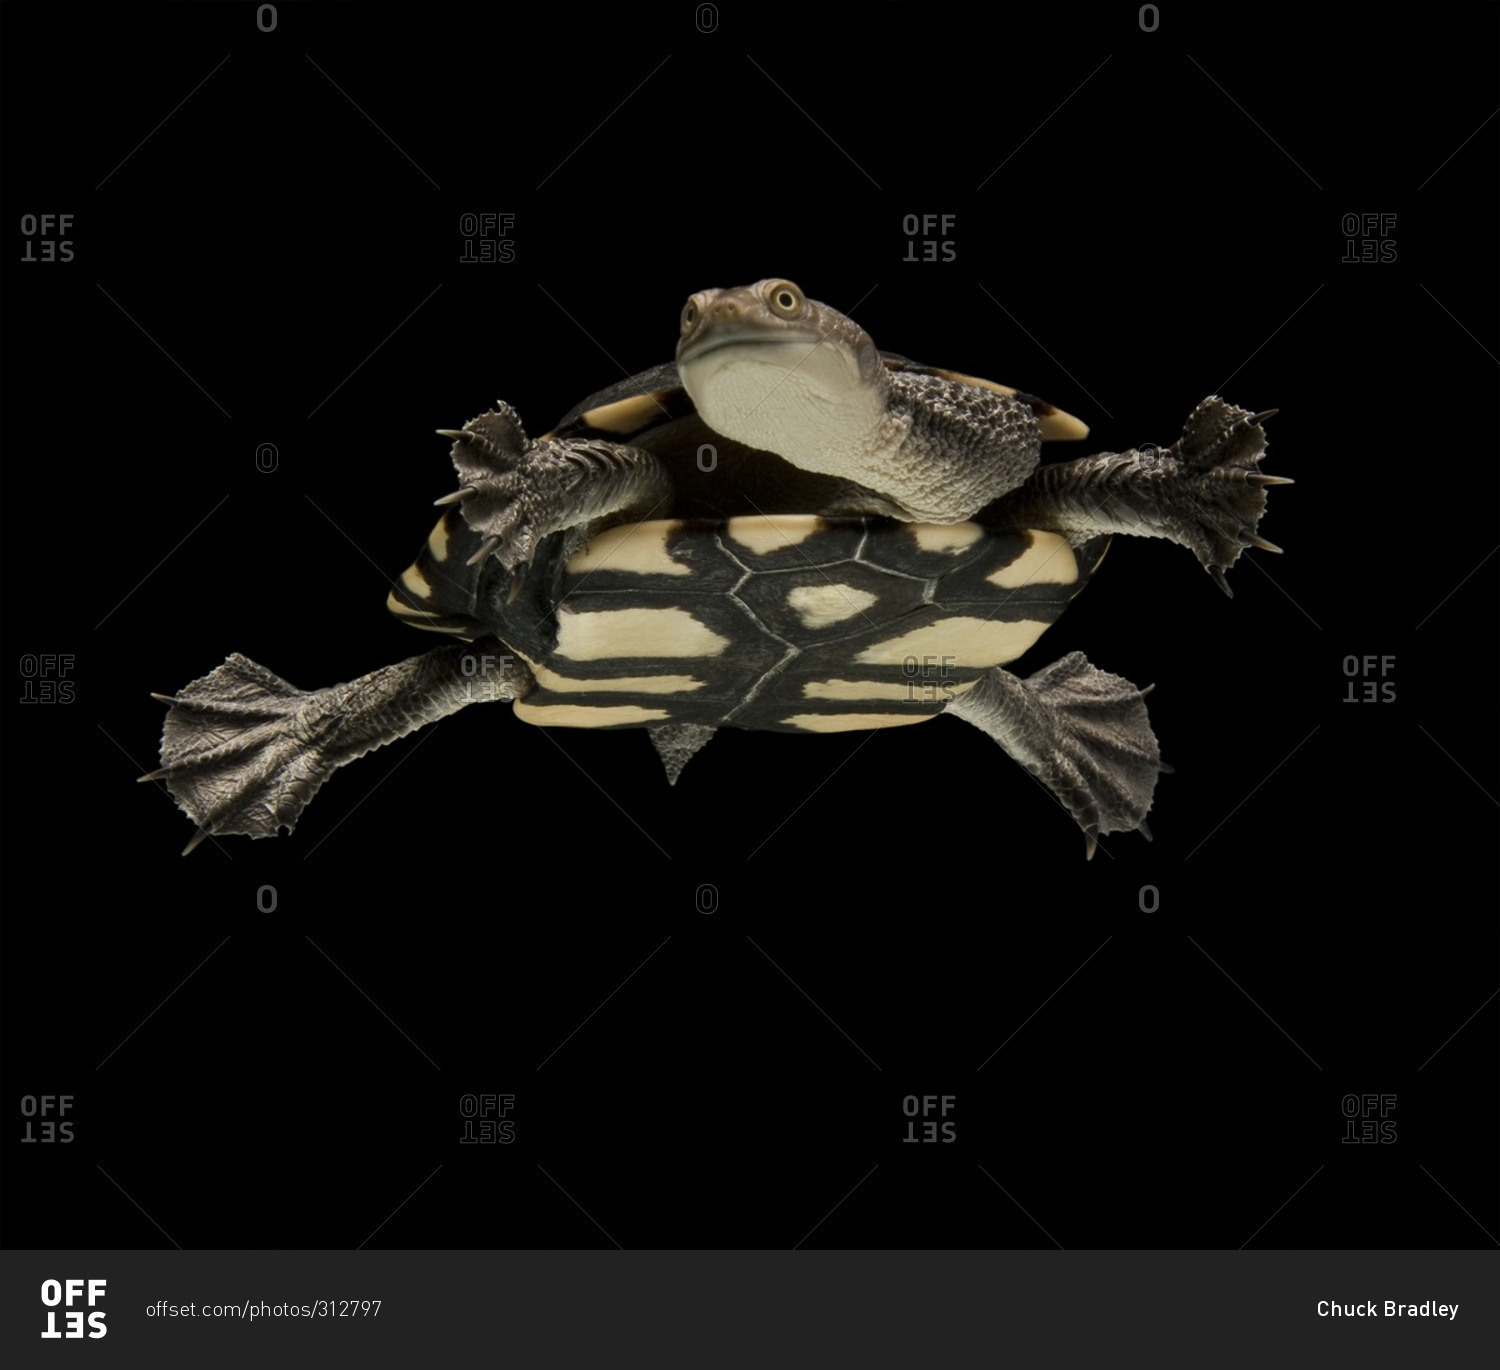 Eastern long-necked turtle swimming in tank against black background